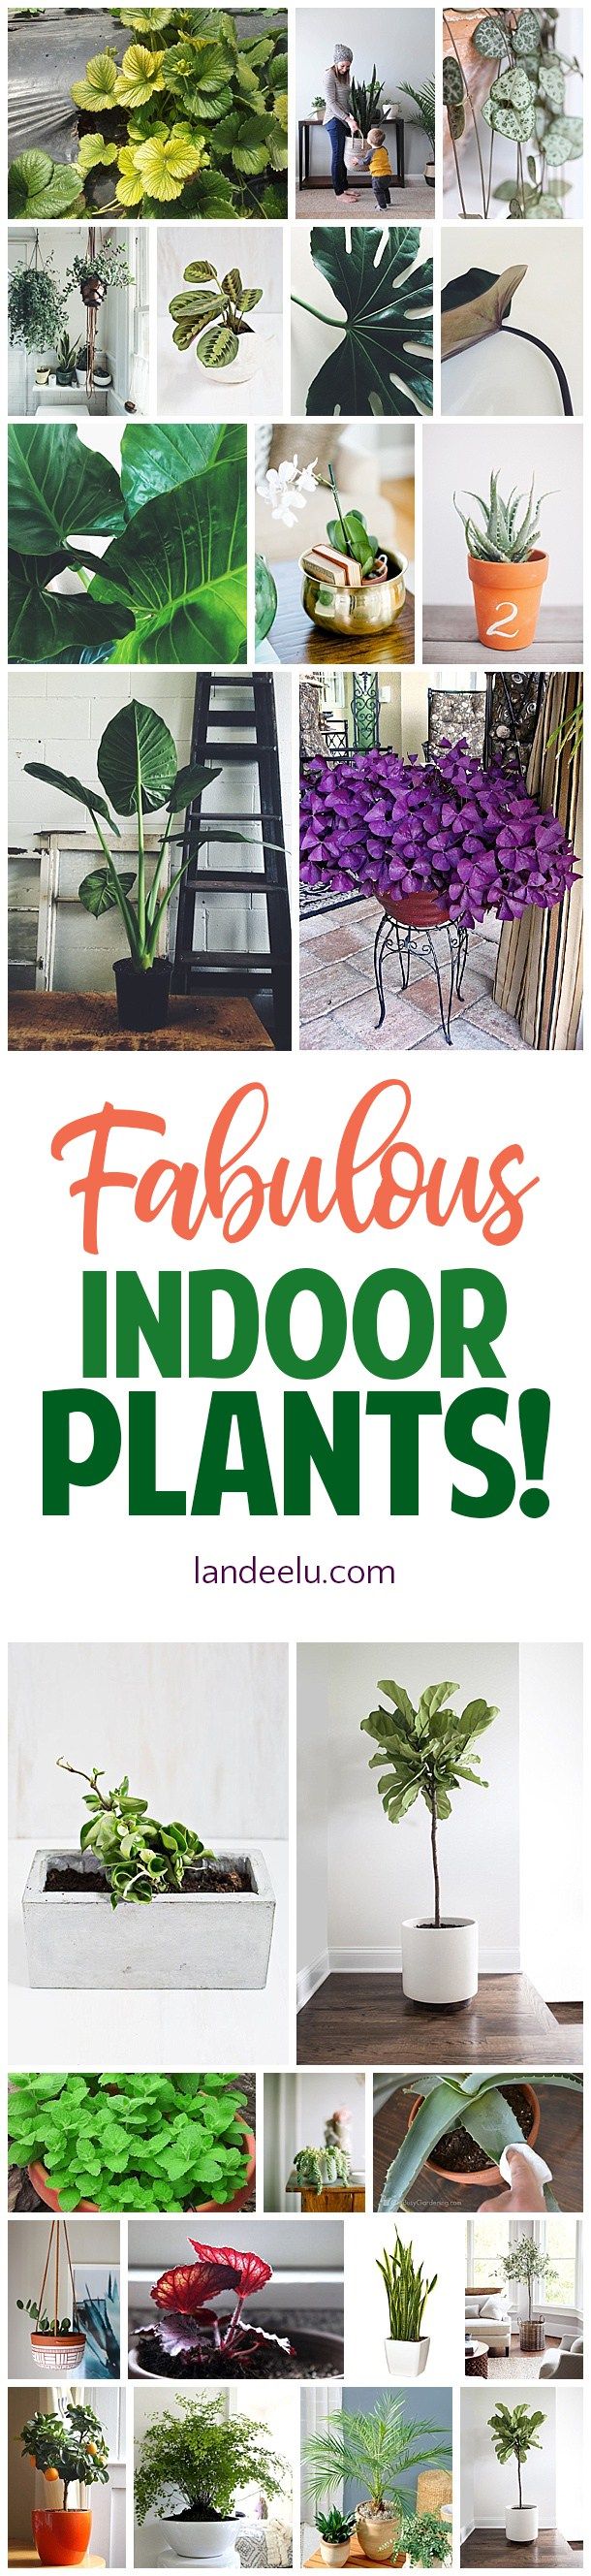 Great suggestions for the best indoor plants for the home! #plantlady #indoorpla...